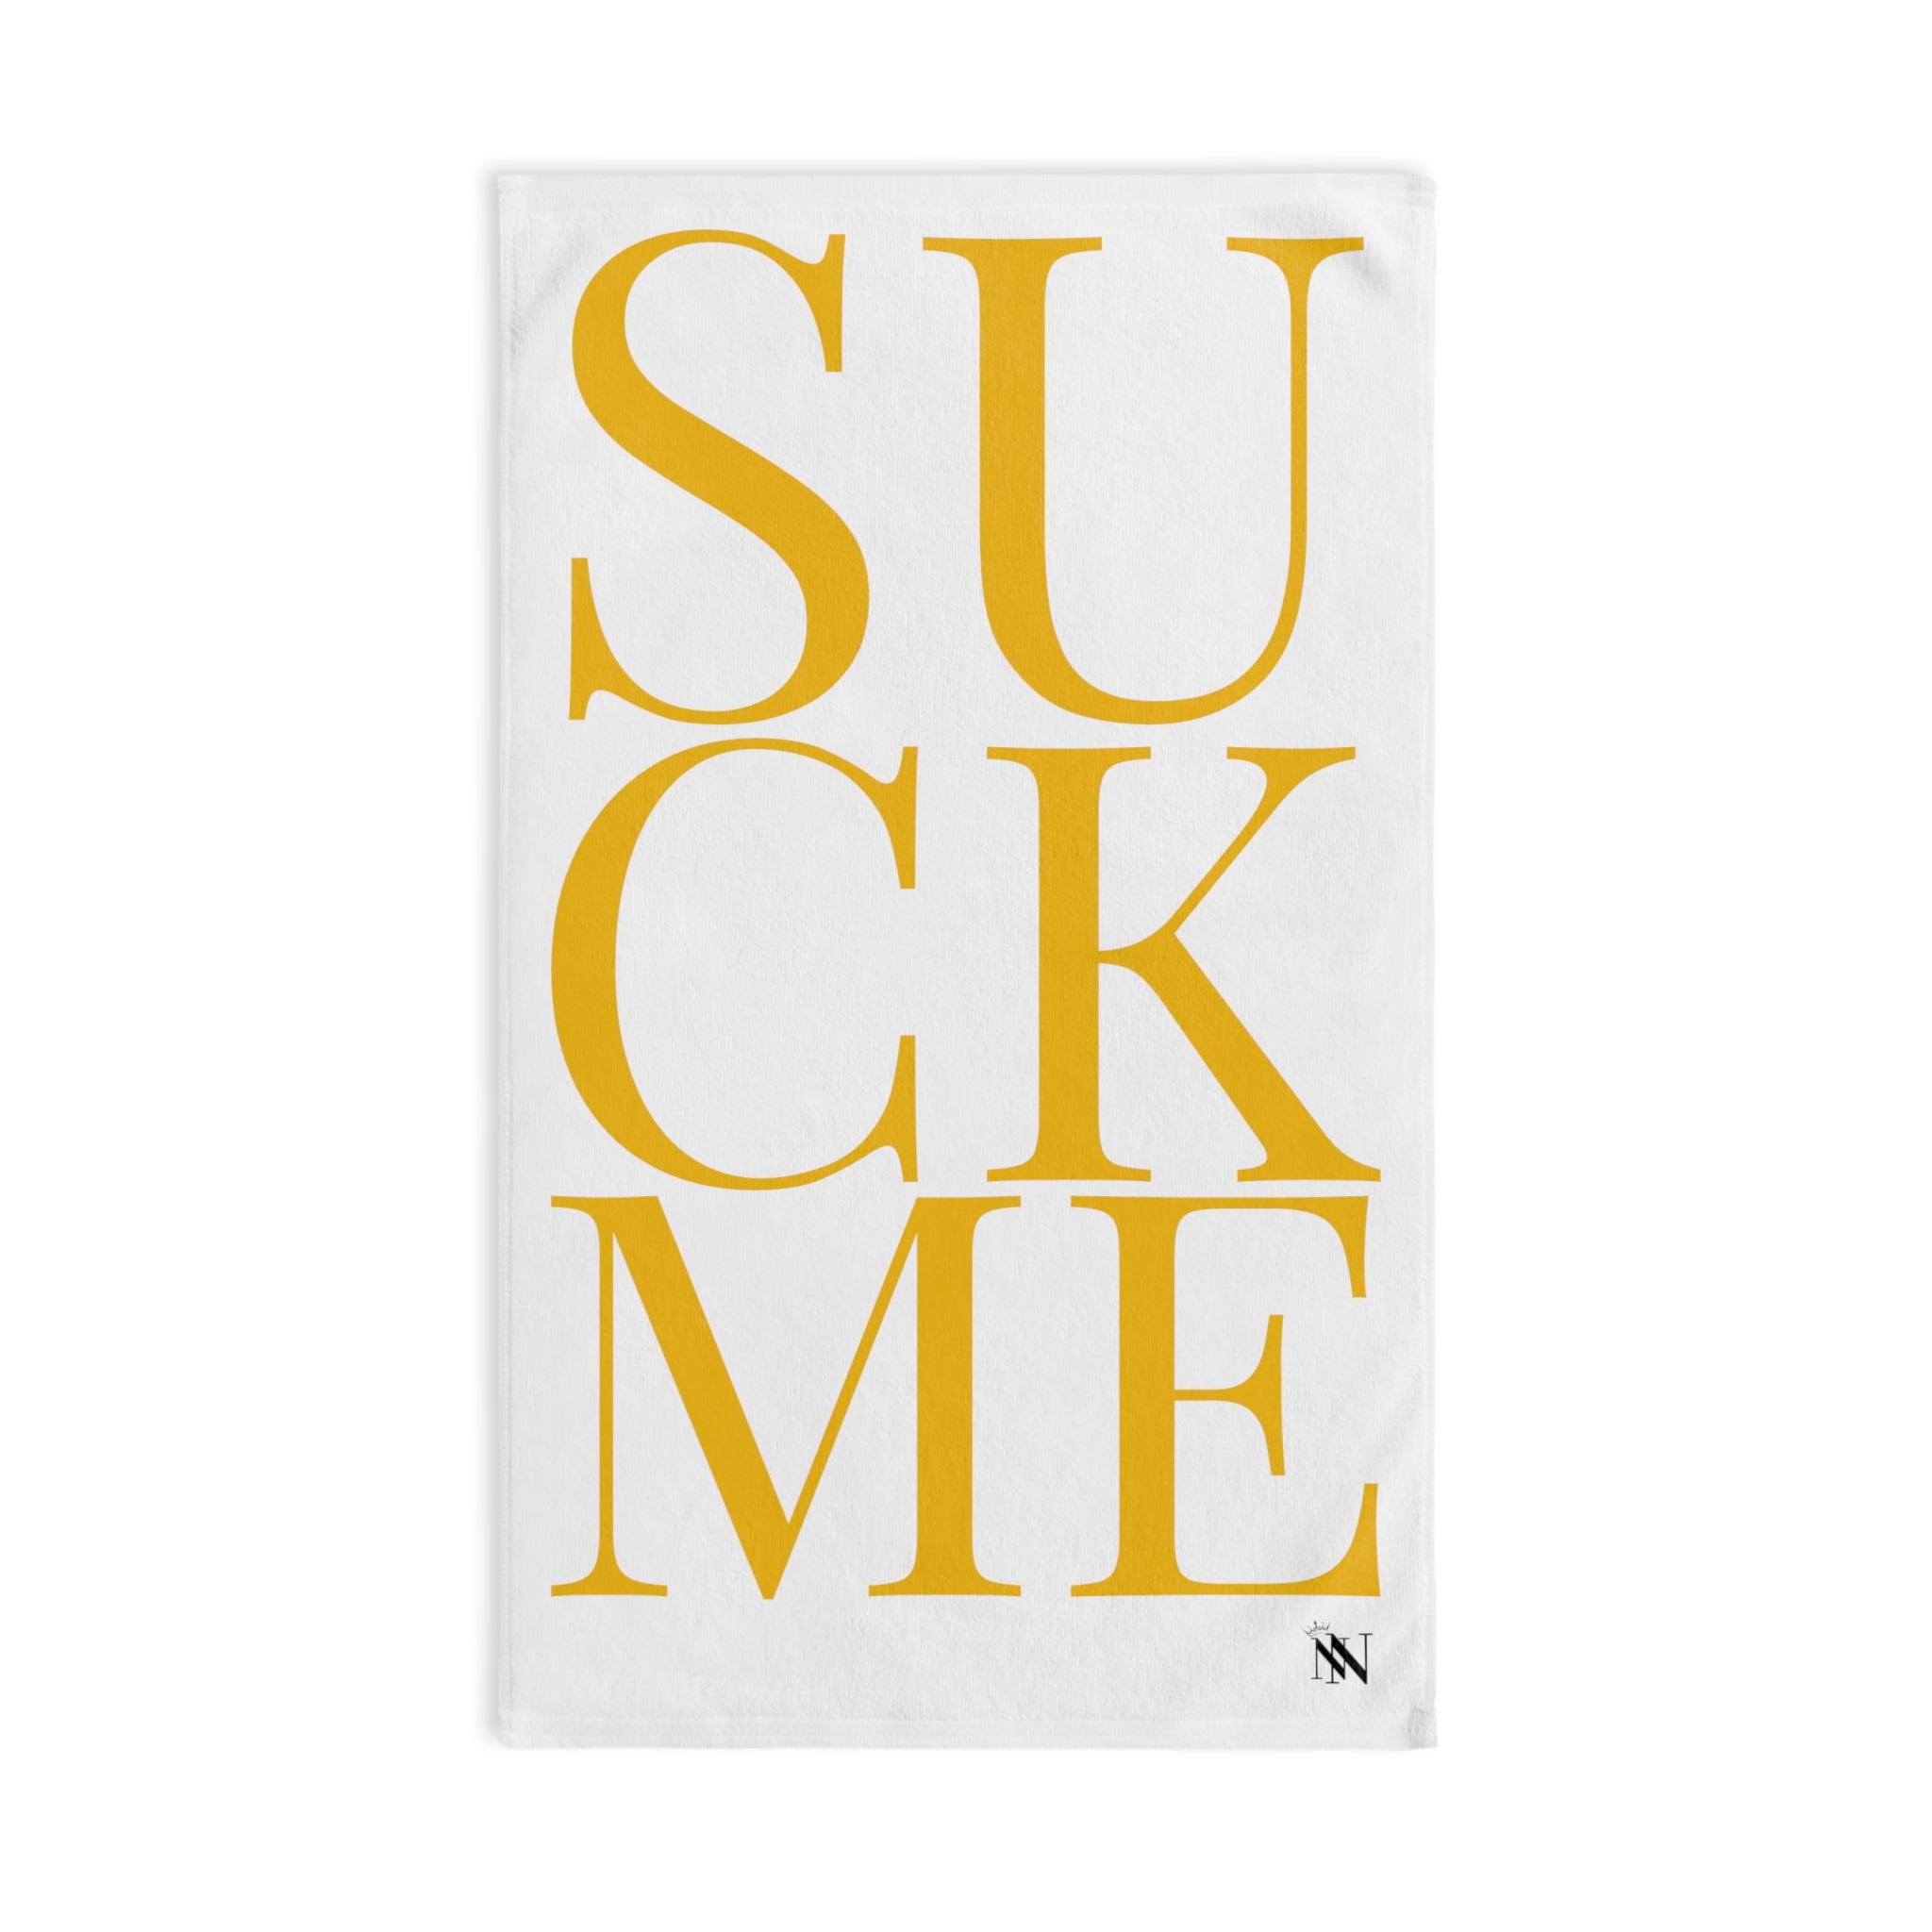 Suck Me YellowWhite | Funny Gifts for Men - Gifts for Him - Birthday Gifts for Men, Him, Her, Husband, Boyfriend, Girlfriend, New Couple Gifts, Fathers & Valentines Day Gifts, Christmas Gifts NECTAR NAPKINS